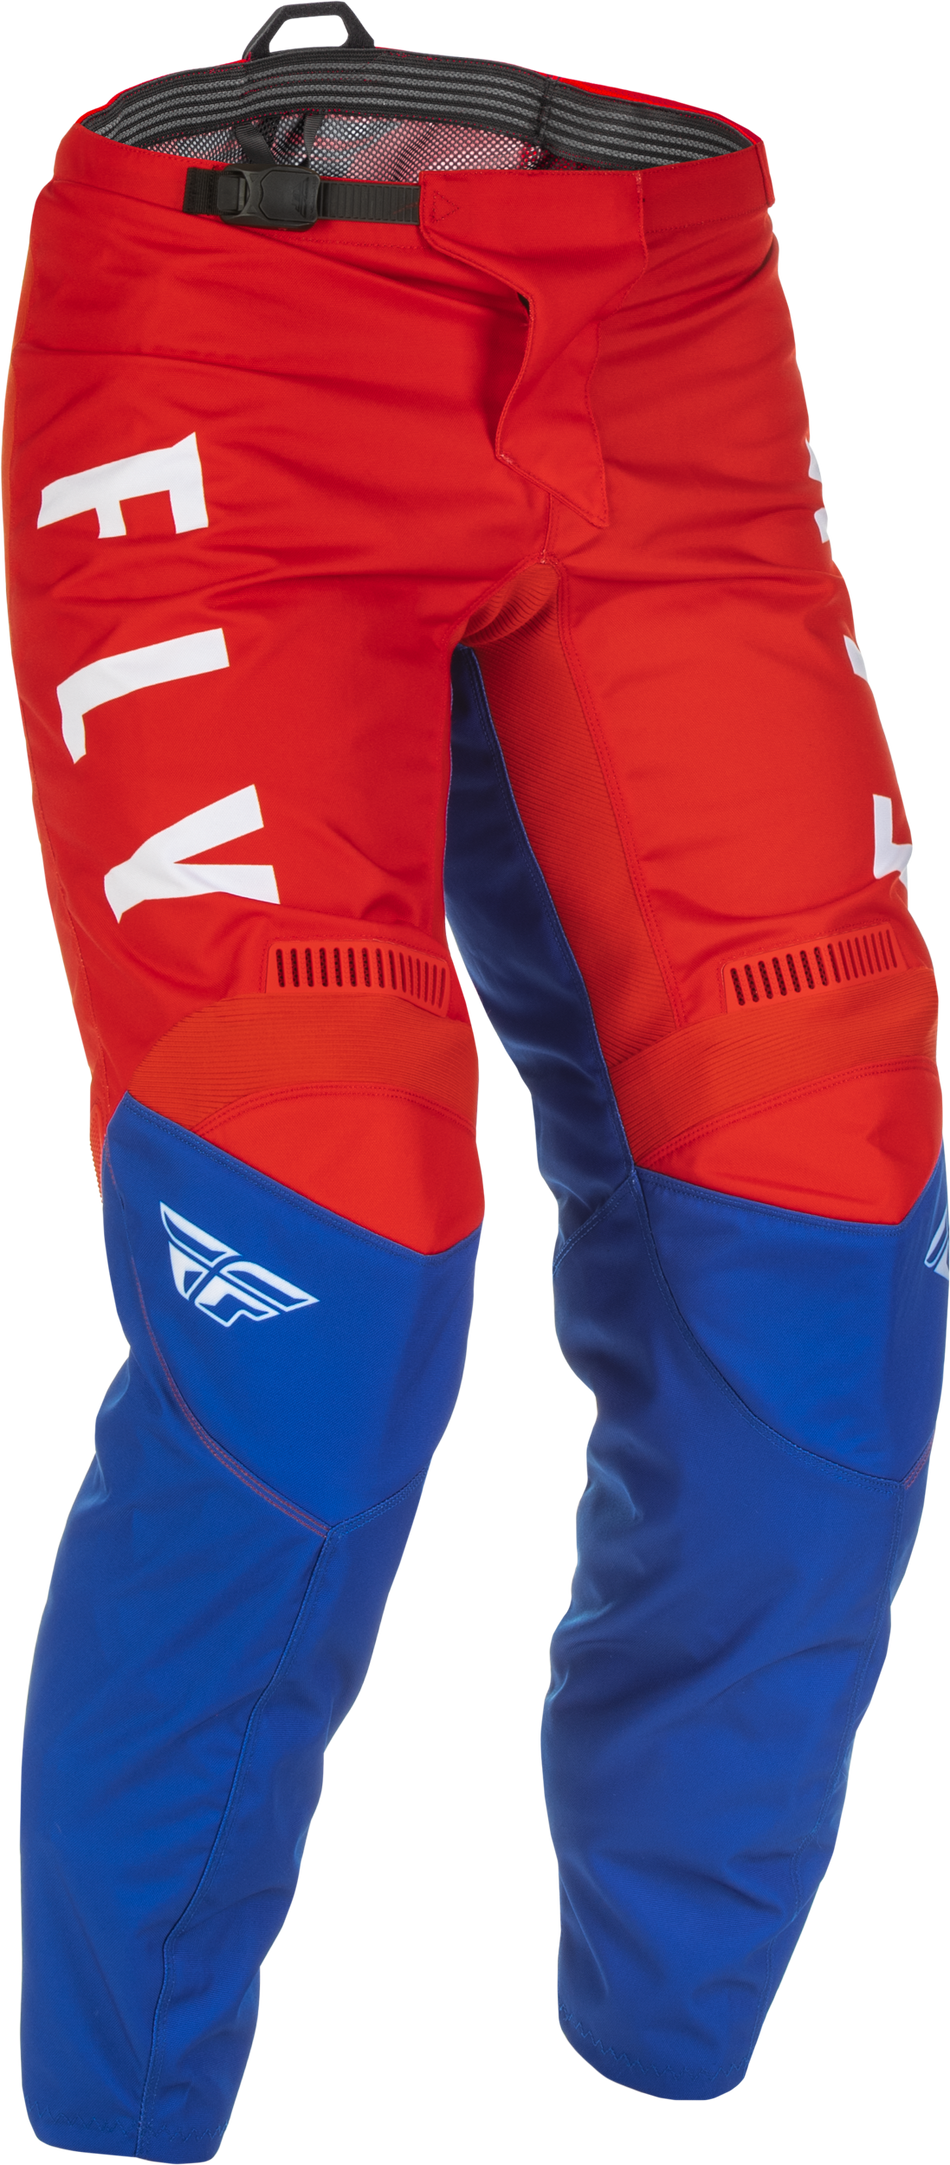 FLY RACING F-16 Pants Red/White/Blue Sz 42 375-93442